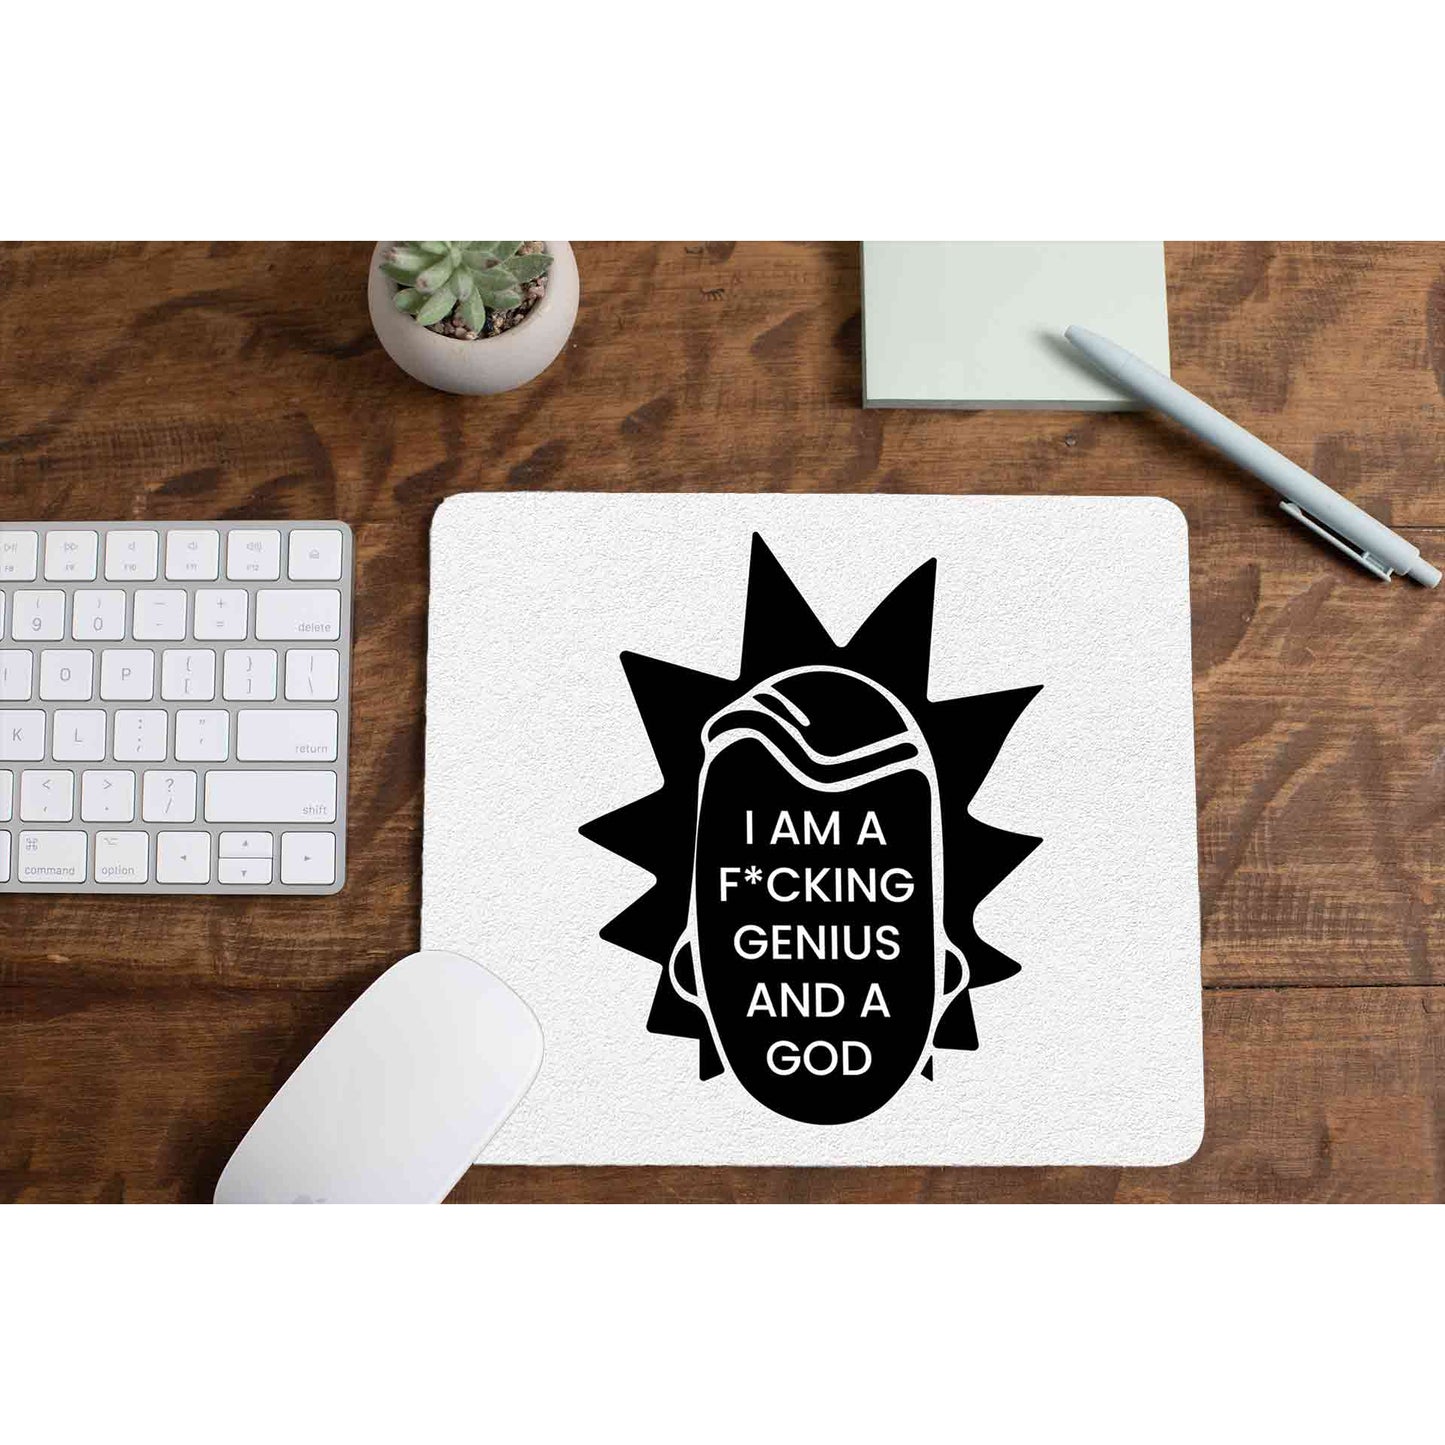 rick and morty genius mousepad logitech large anime buy online india the banyan tee tbt men women girls boys unisex  rick and morty online summer beth mr meeseeks jerry quote vector art clothing accessories merchandise